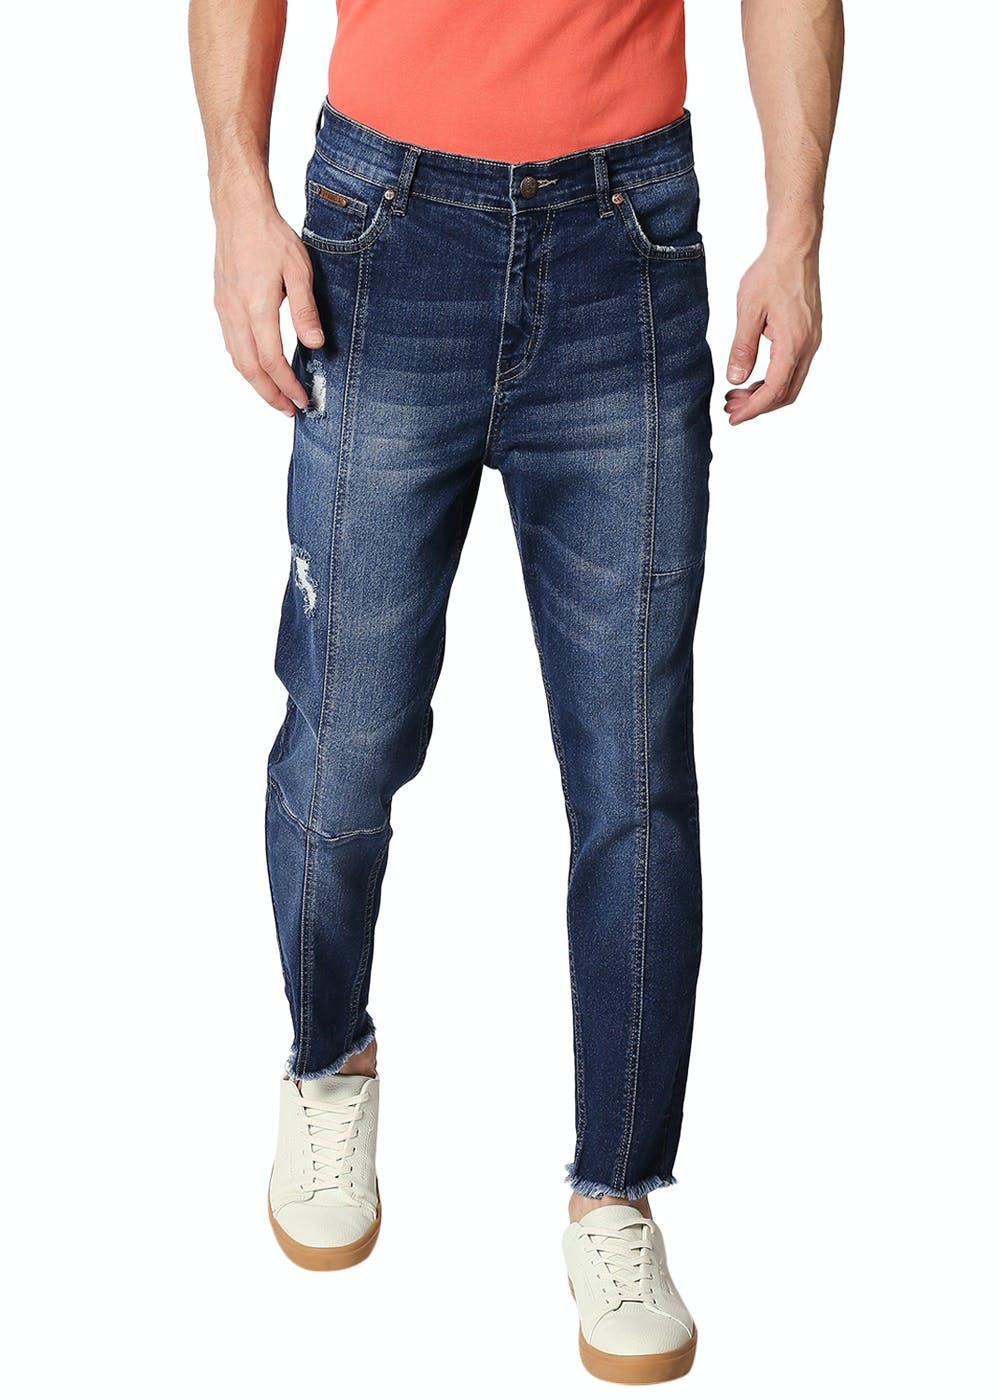 Get Stitch Detail Denim Washed Ripped Patch Jeans at ₹ 999 | LBB Shop